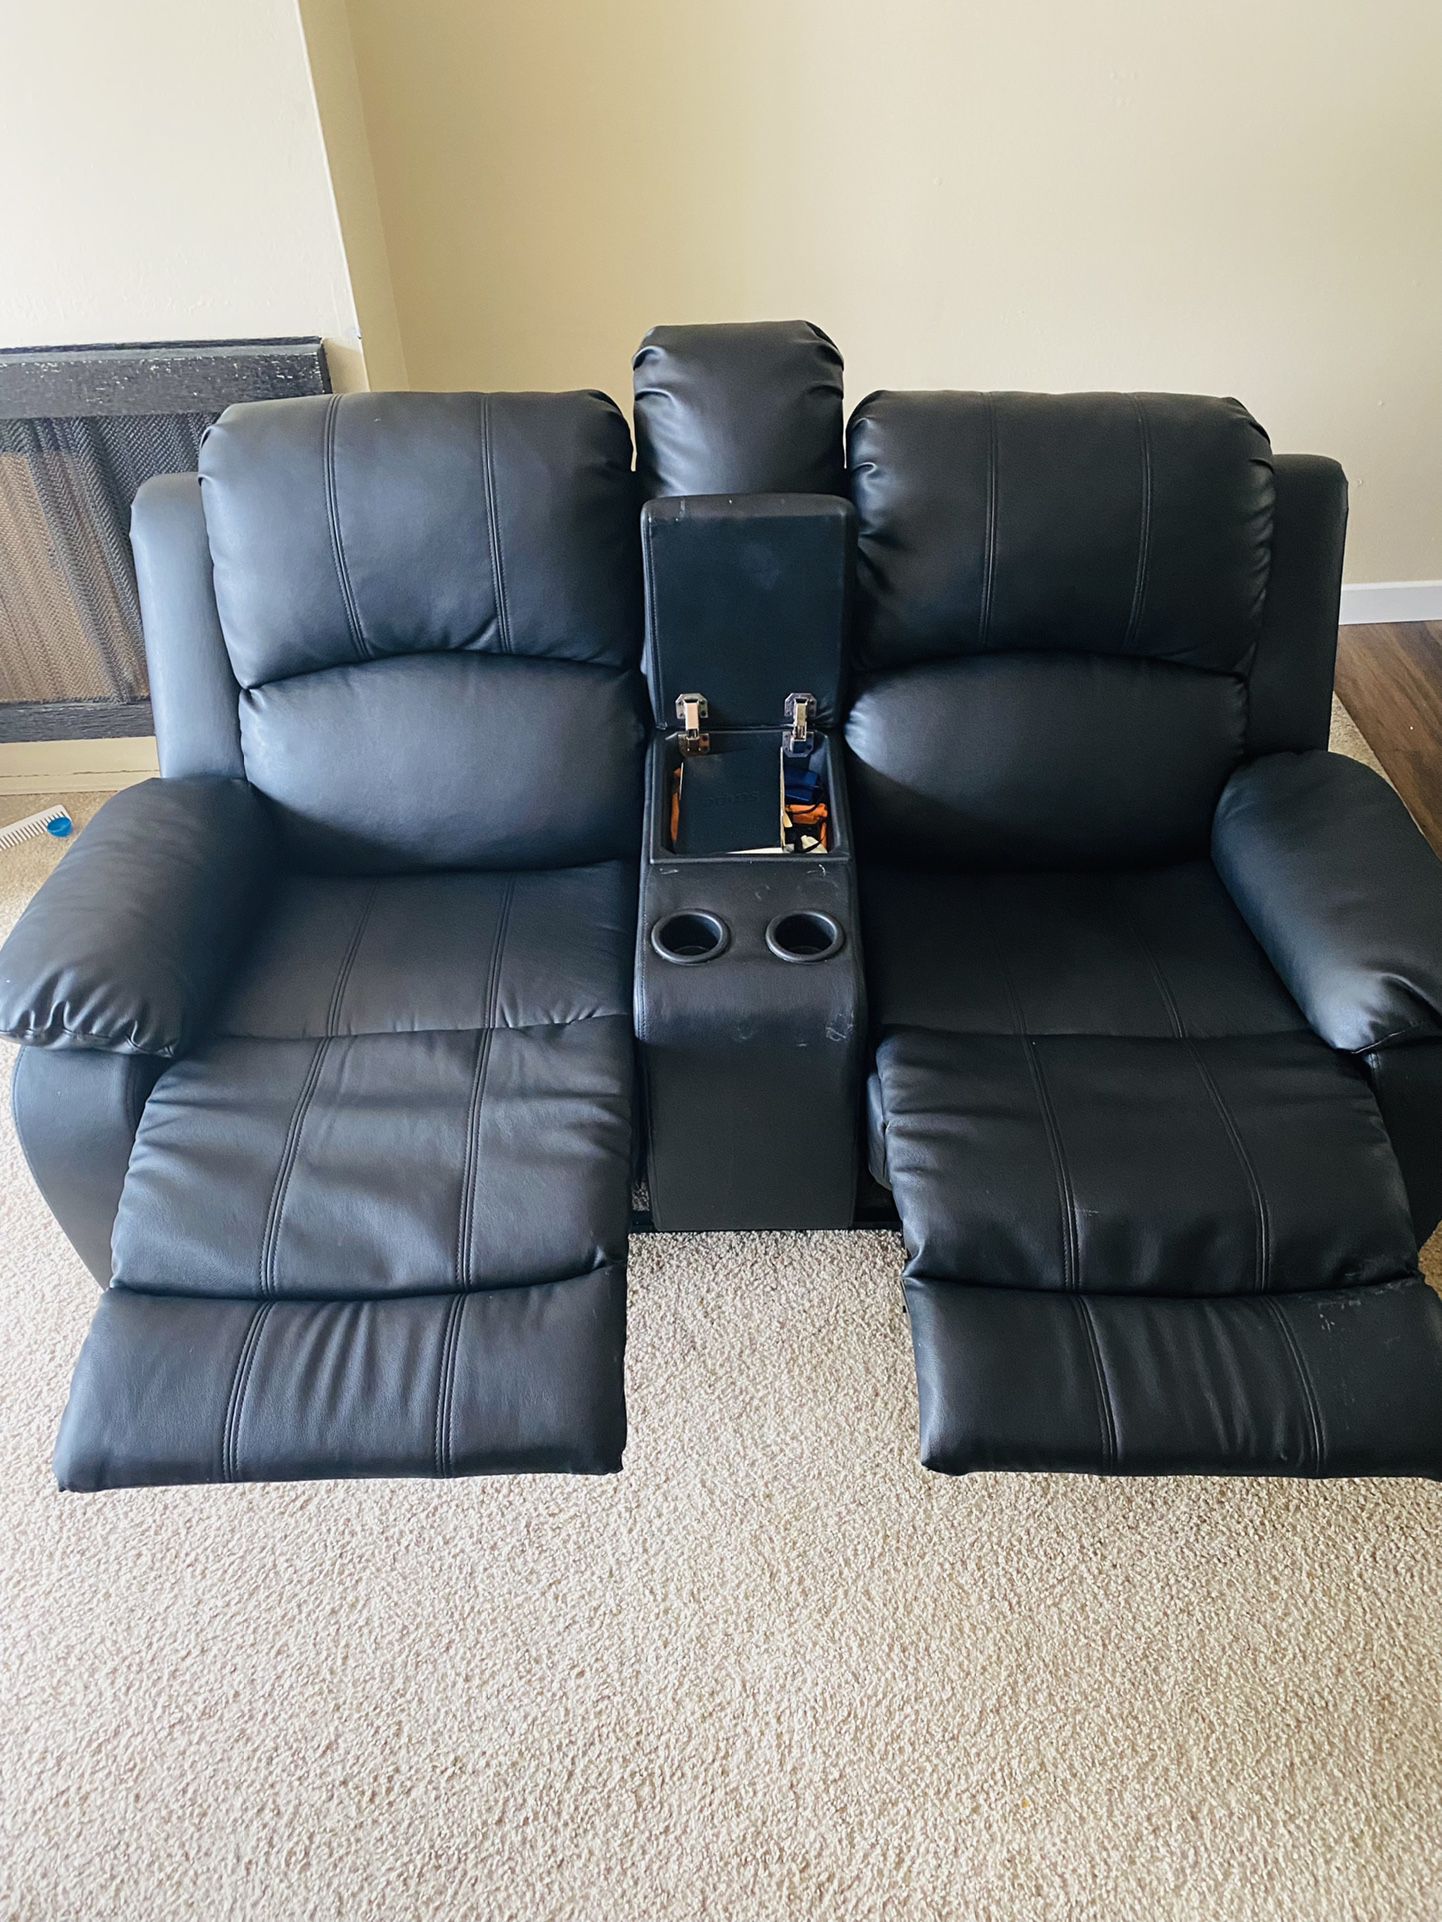 Loveseat (Leather recliner)